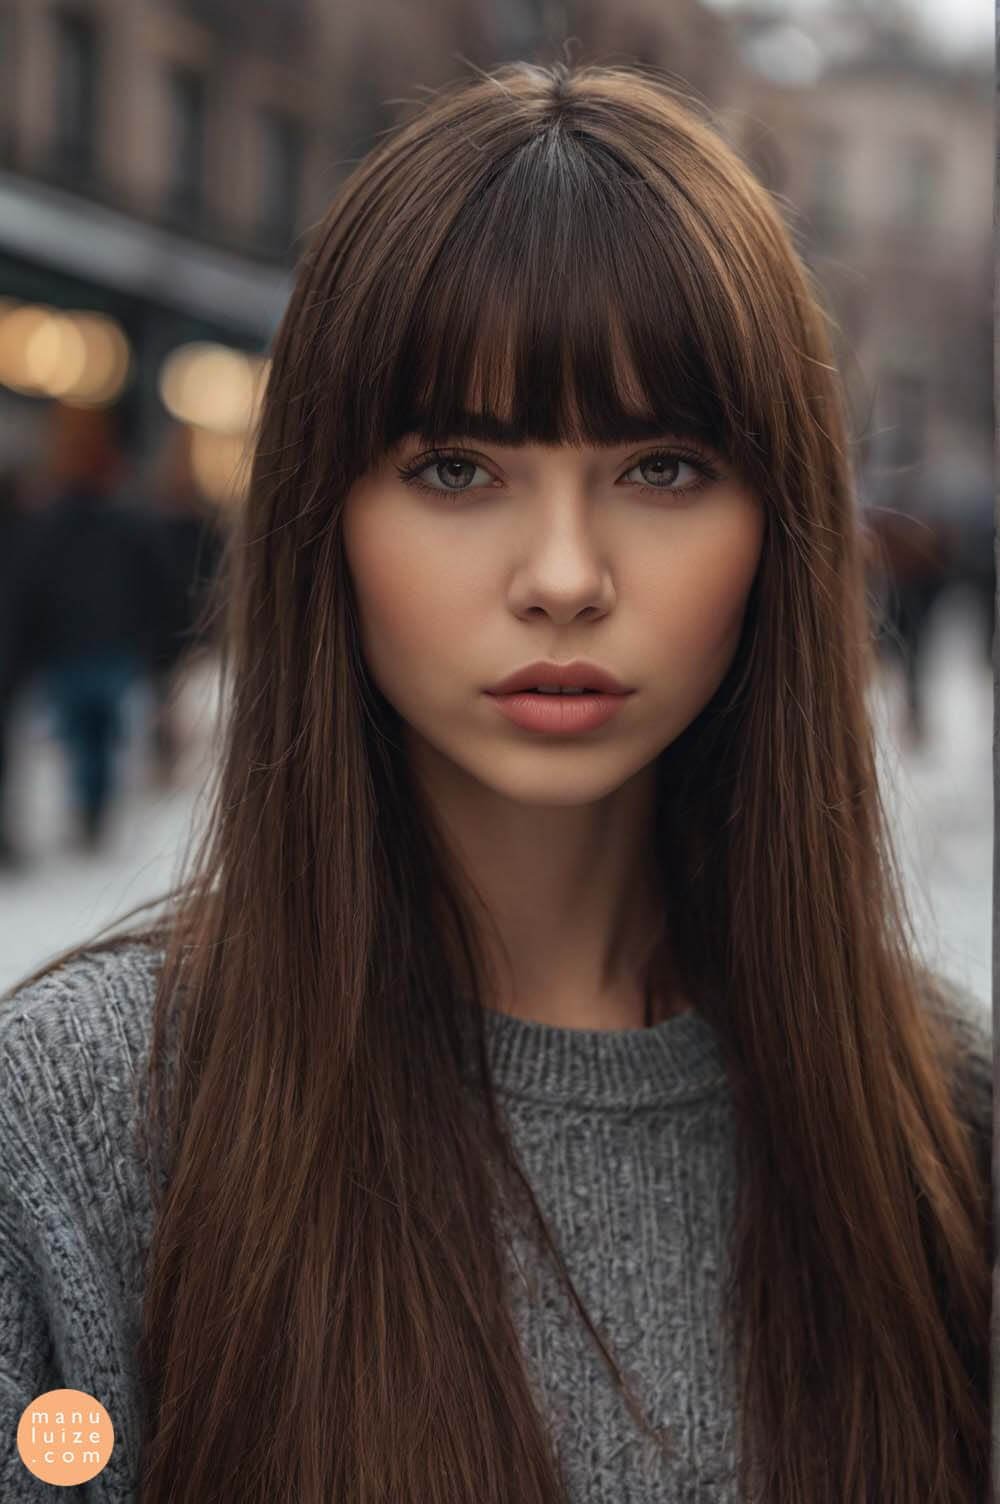 Long straight hair with bangs